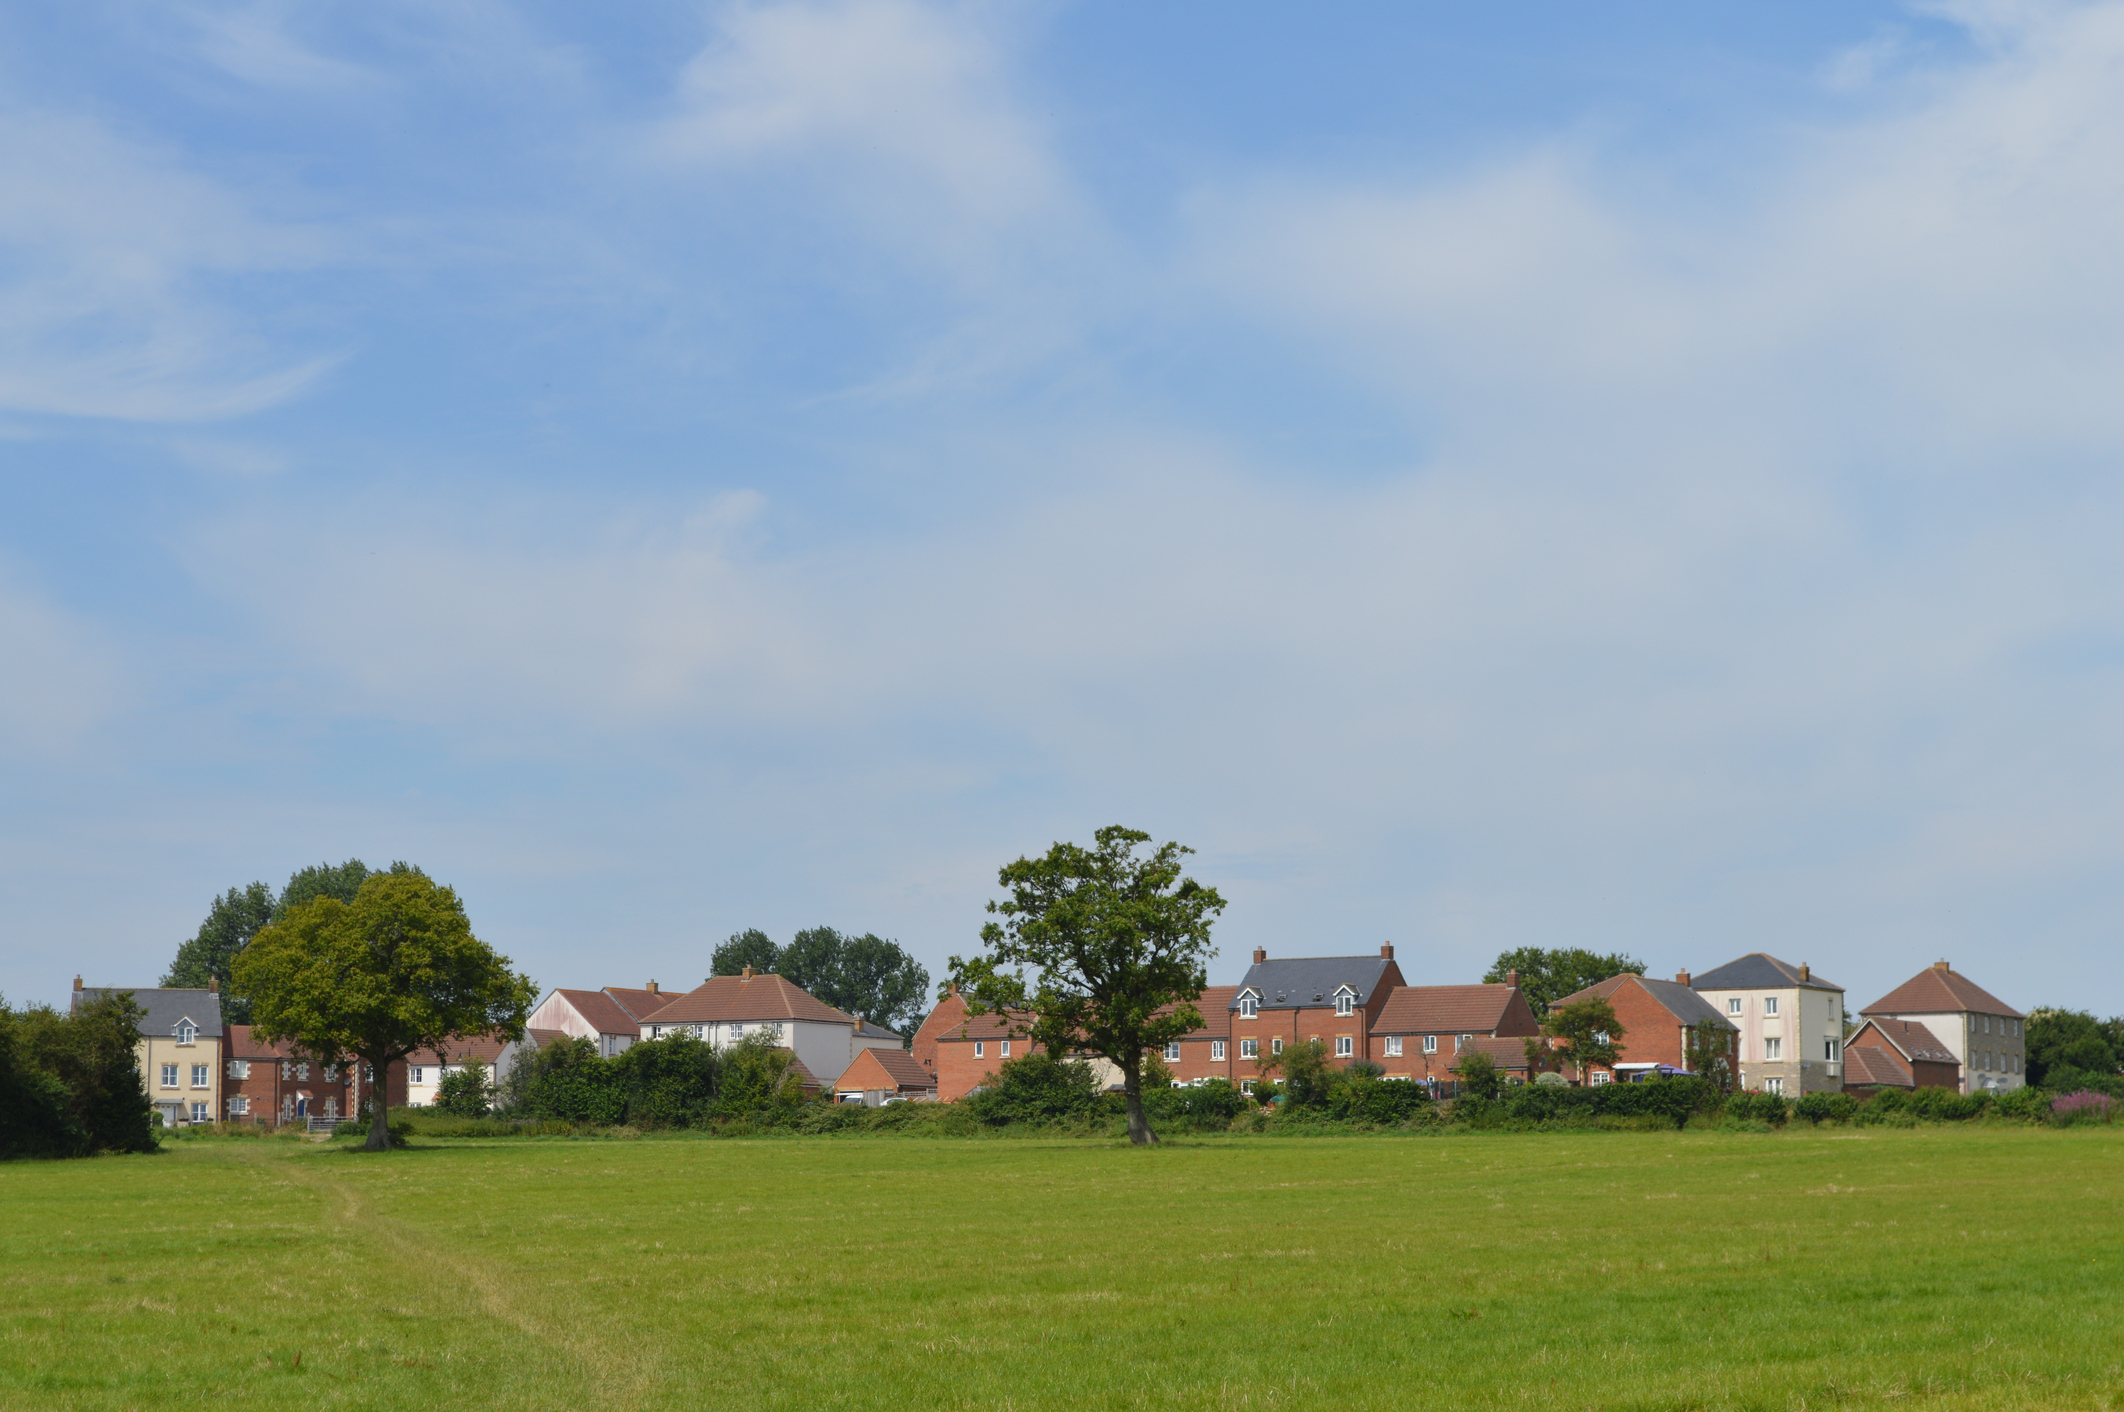 View from a development field of a fairly new housing estate on the edge of the town.